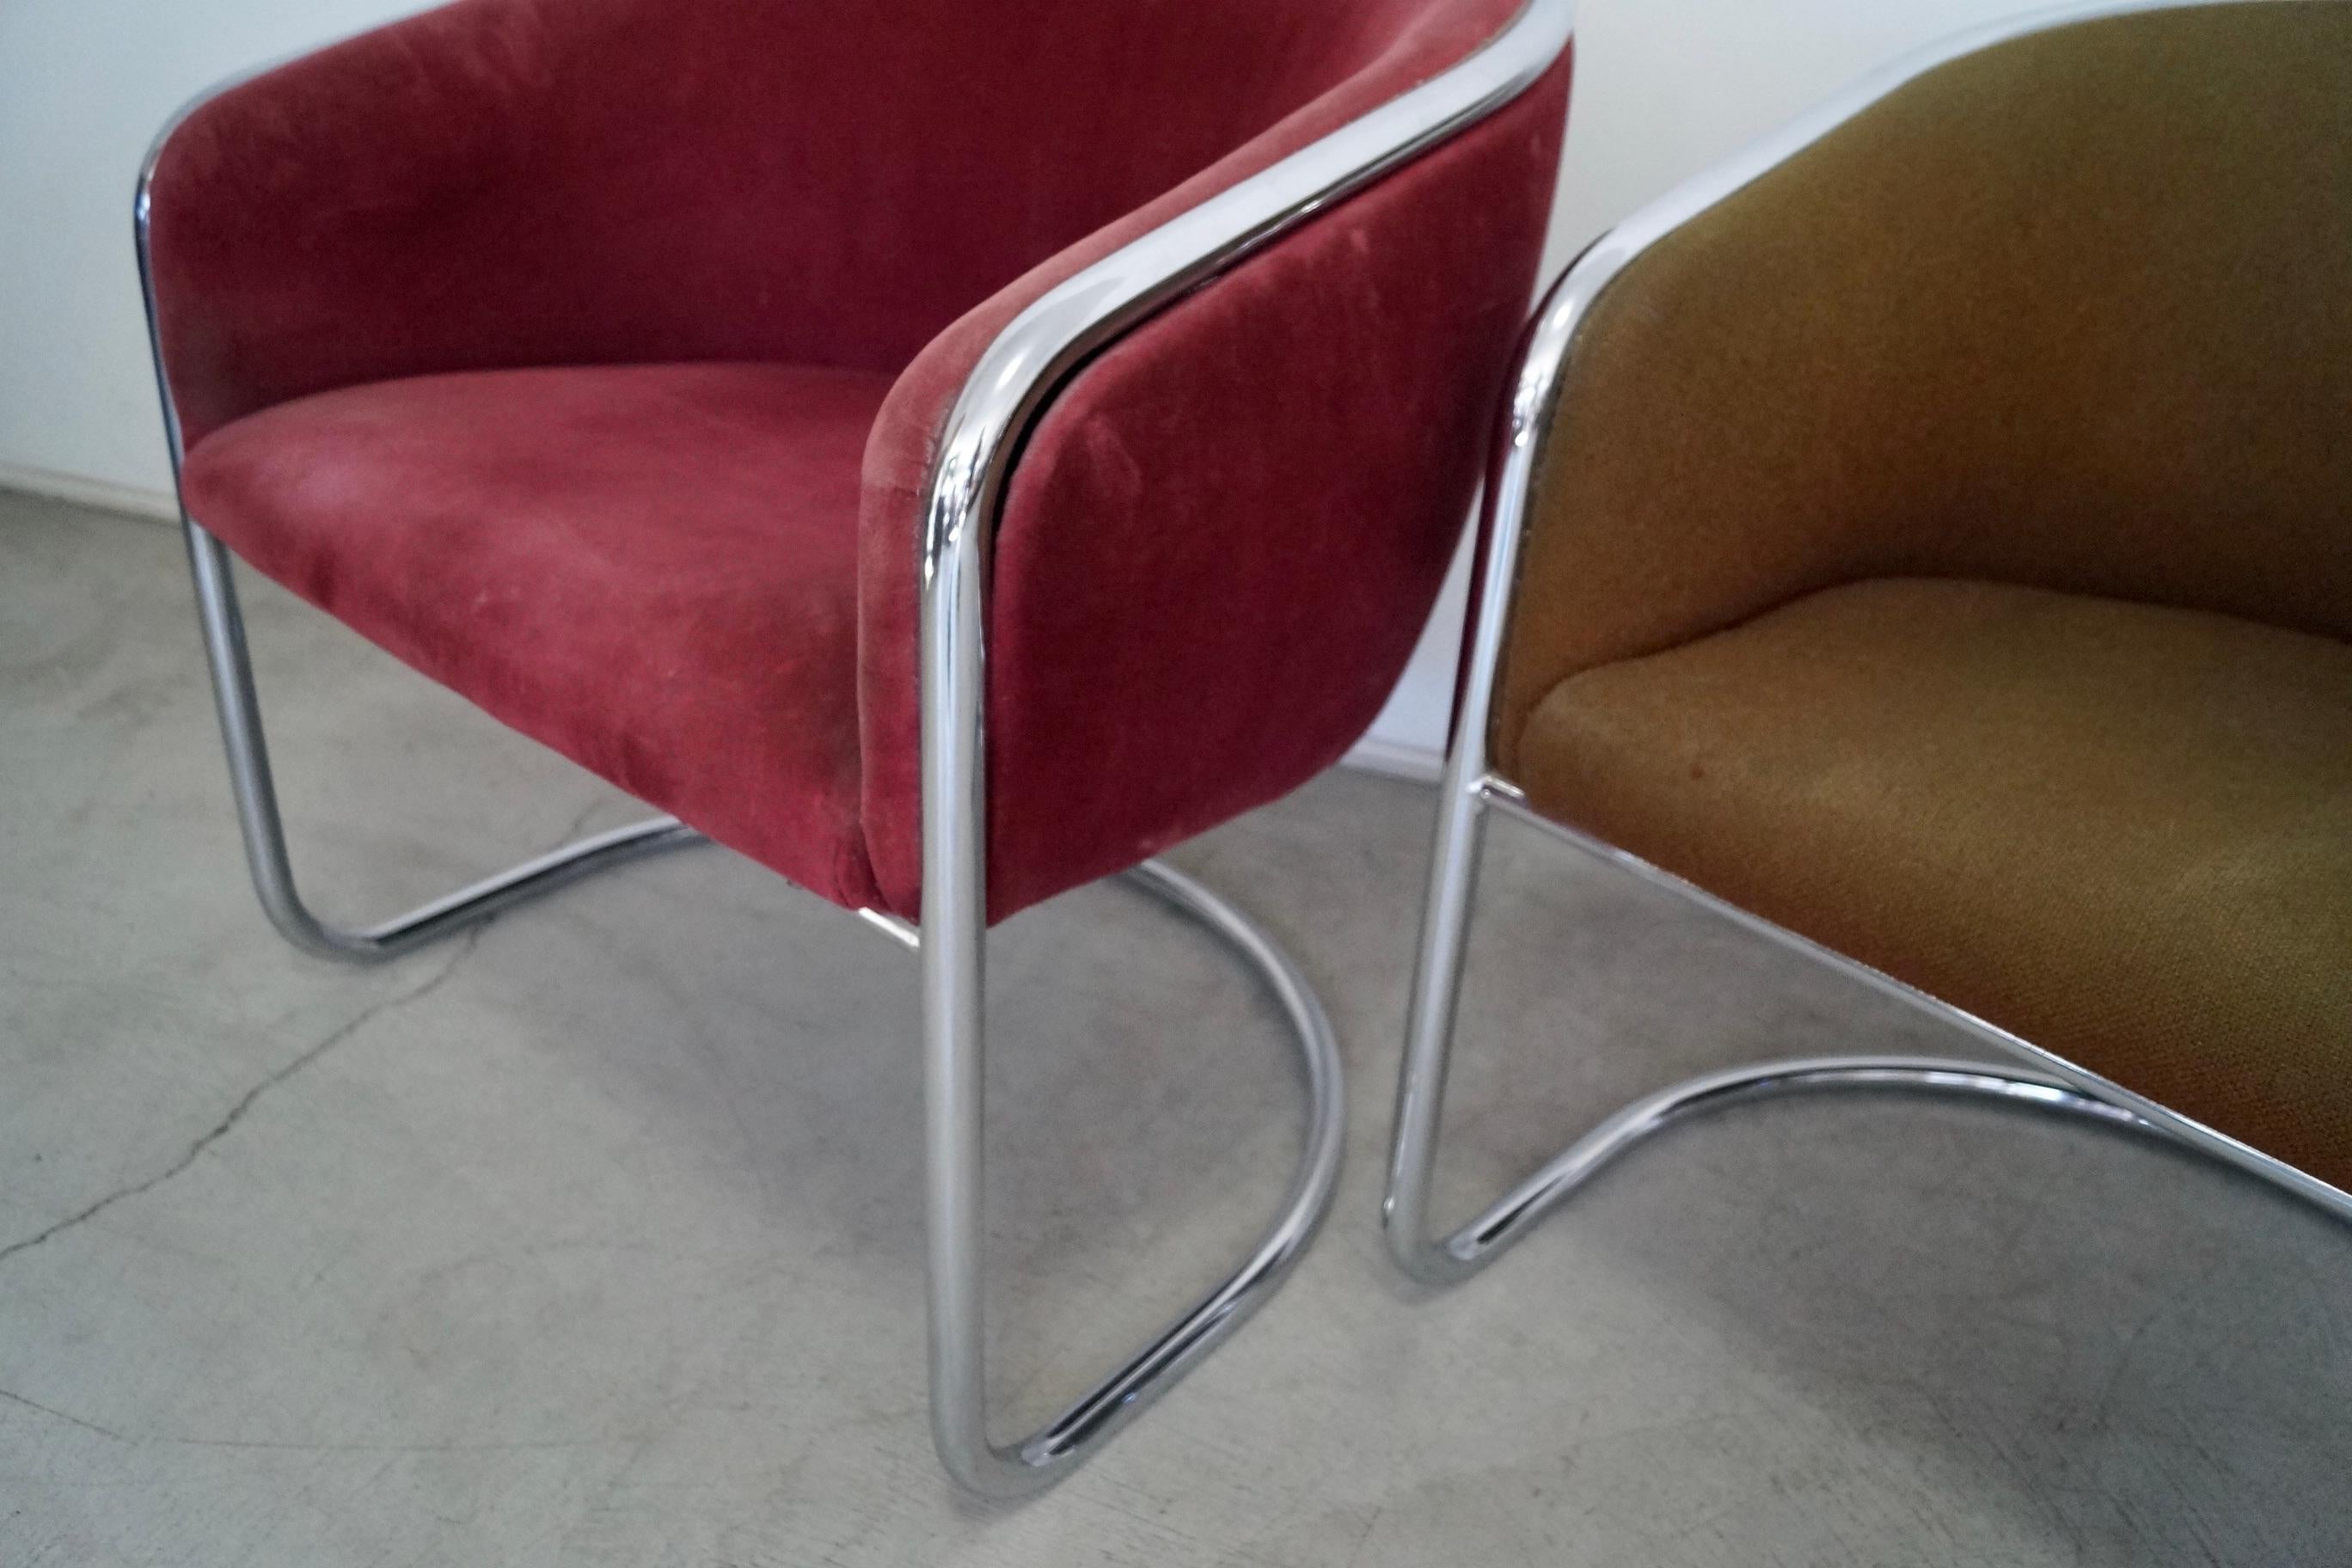 1970's Mid-Century Modern Thonet Chrome Armchairs - Set of Four For Sale 13